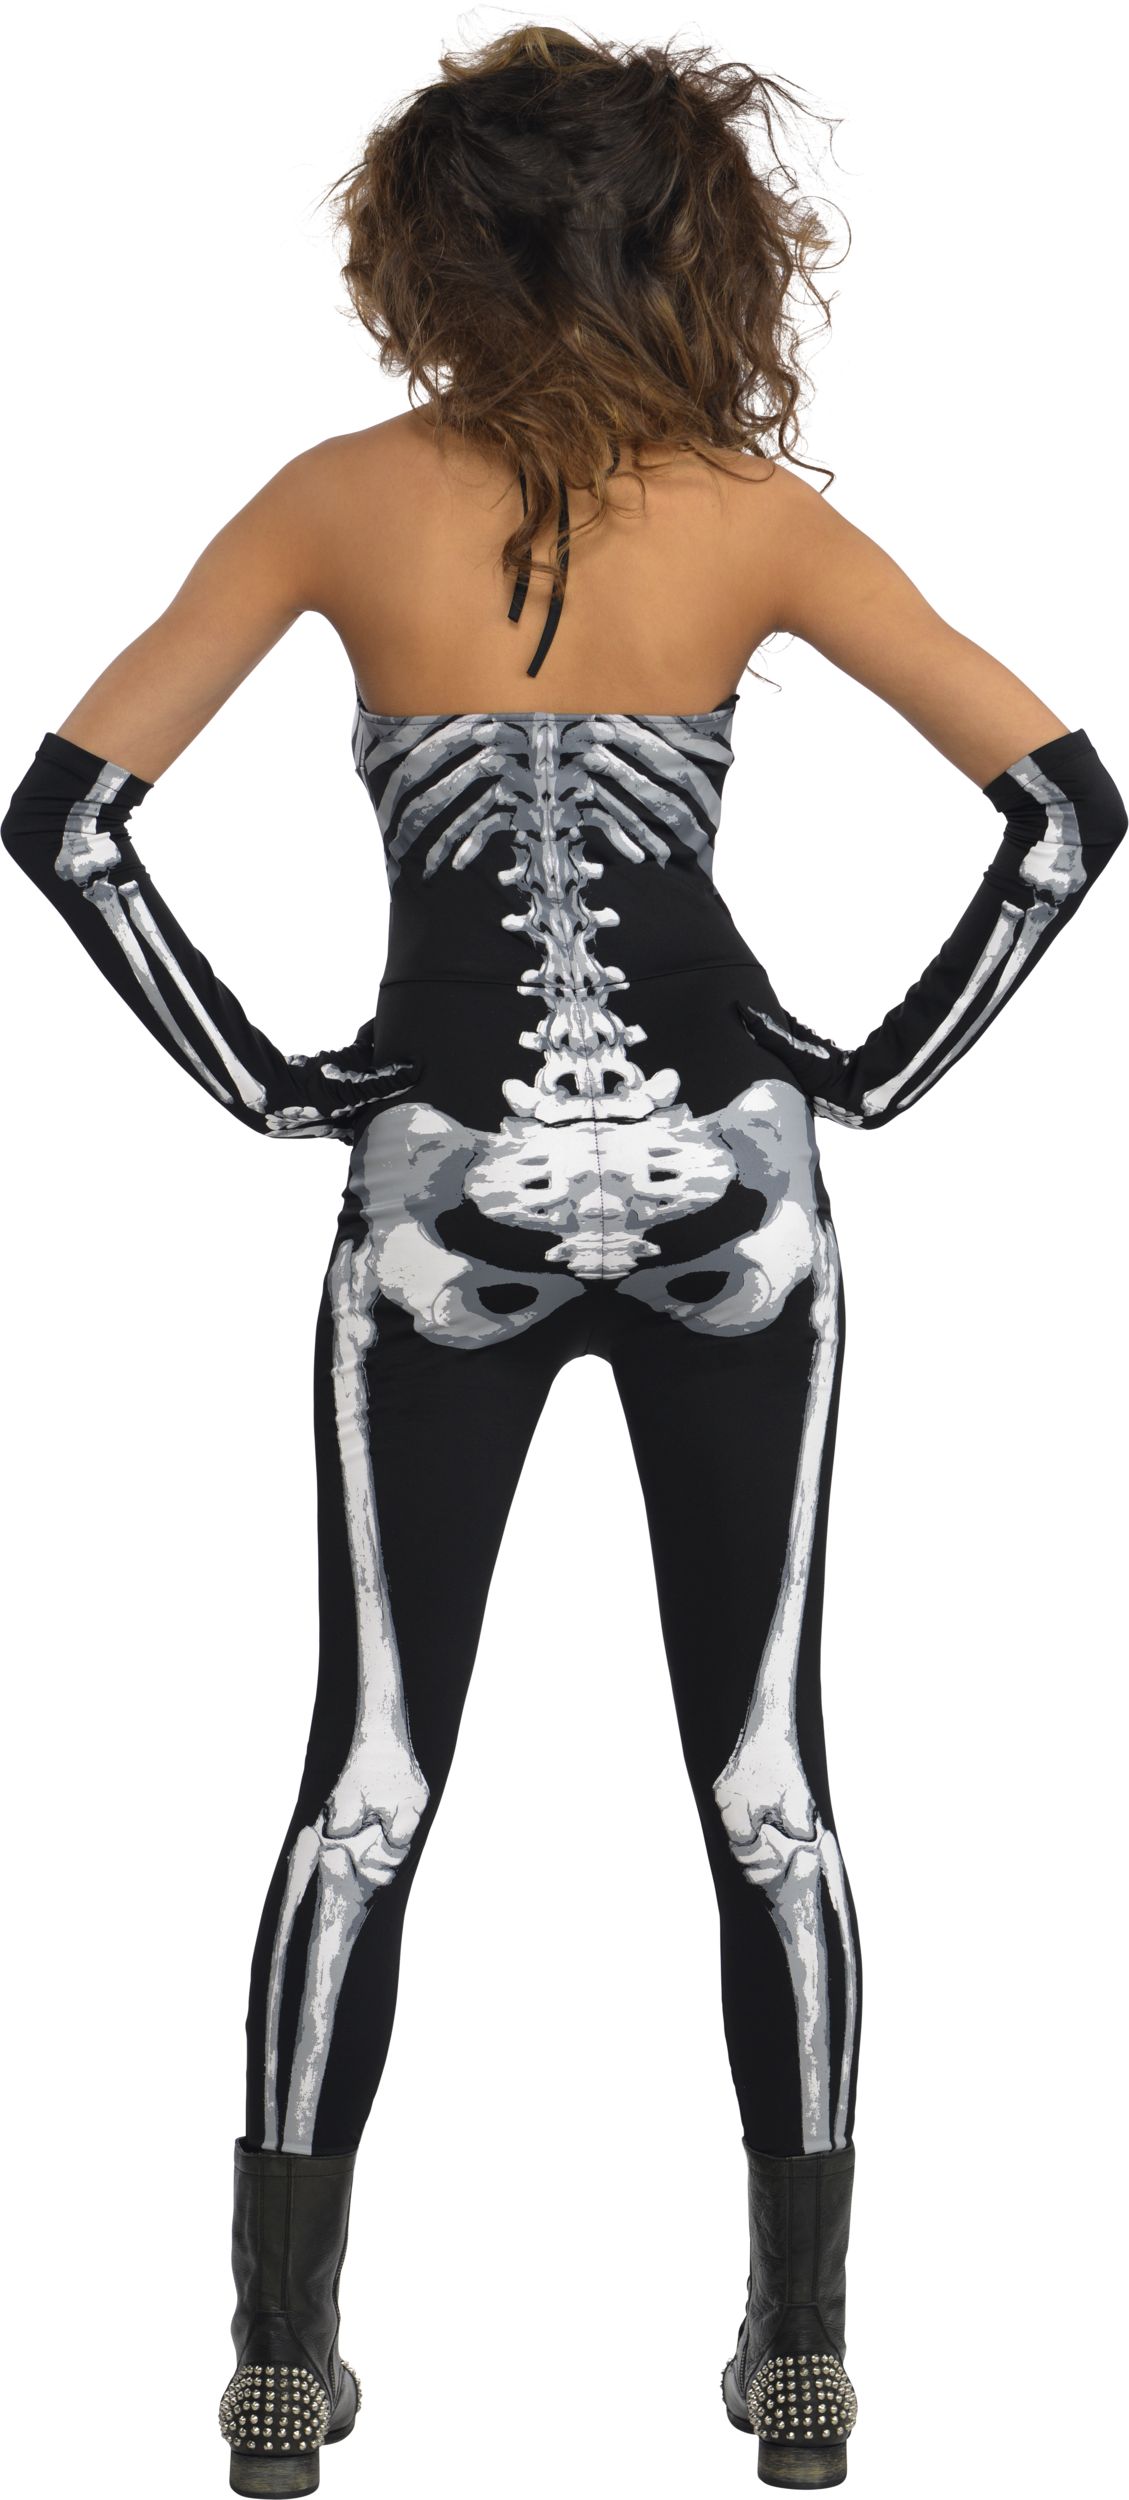 Women's X-Ray Skeleton Black/White Jumpsuit with Gloves Halloween